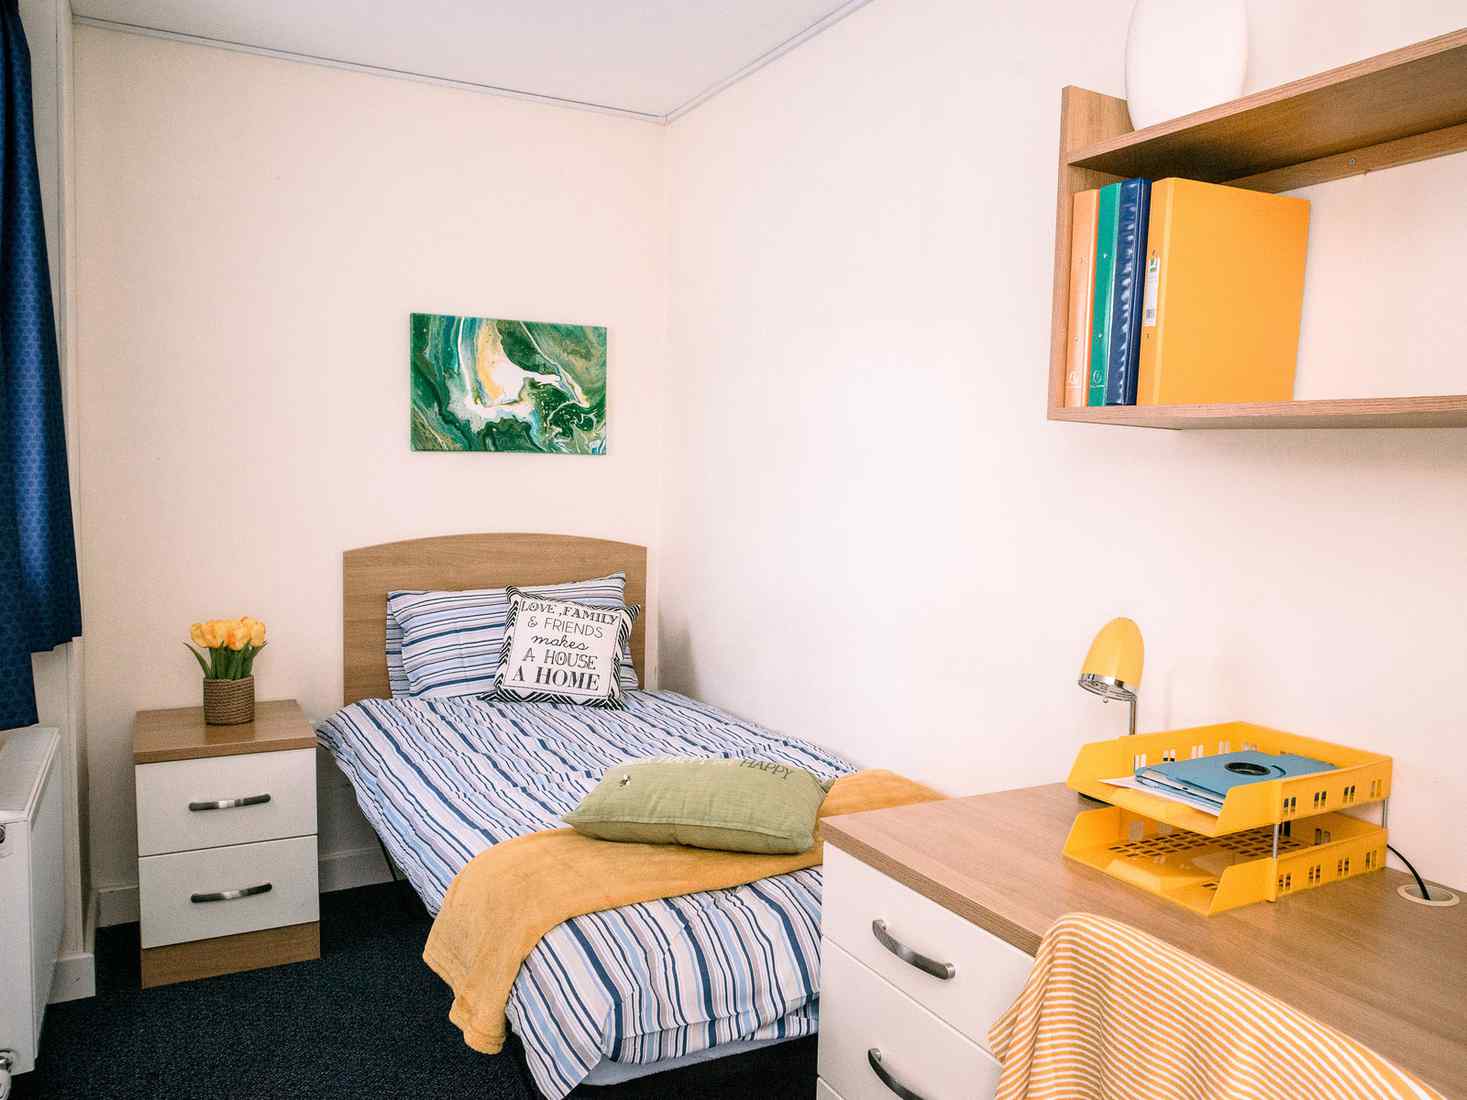 View of Garden Street room, with a single bed, drawers, desk and shelving. 